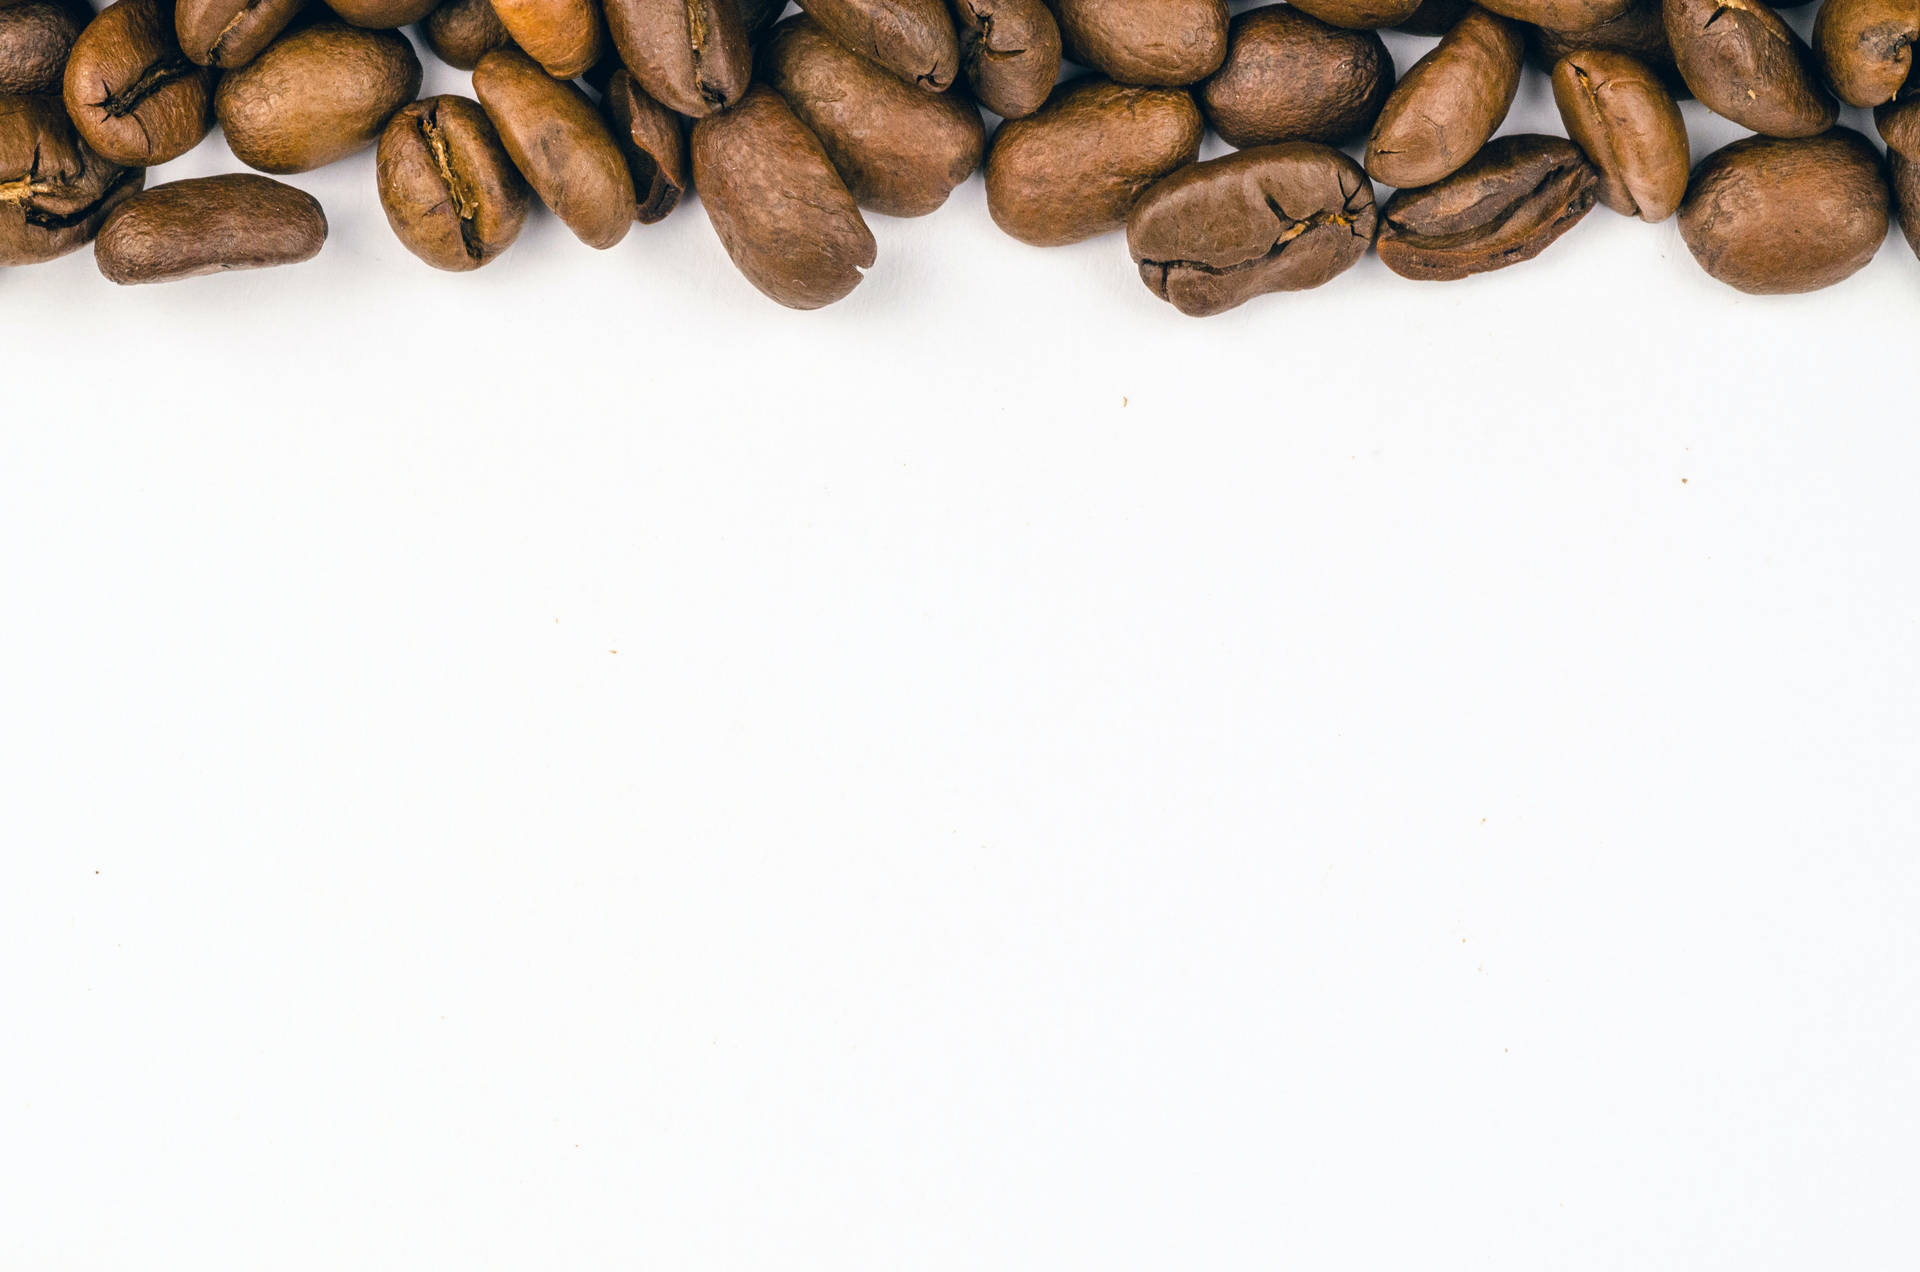 Coffee Beans On White Background